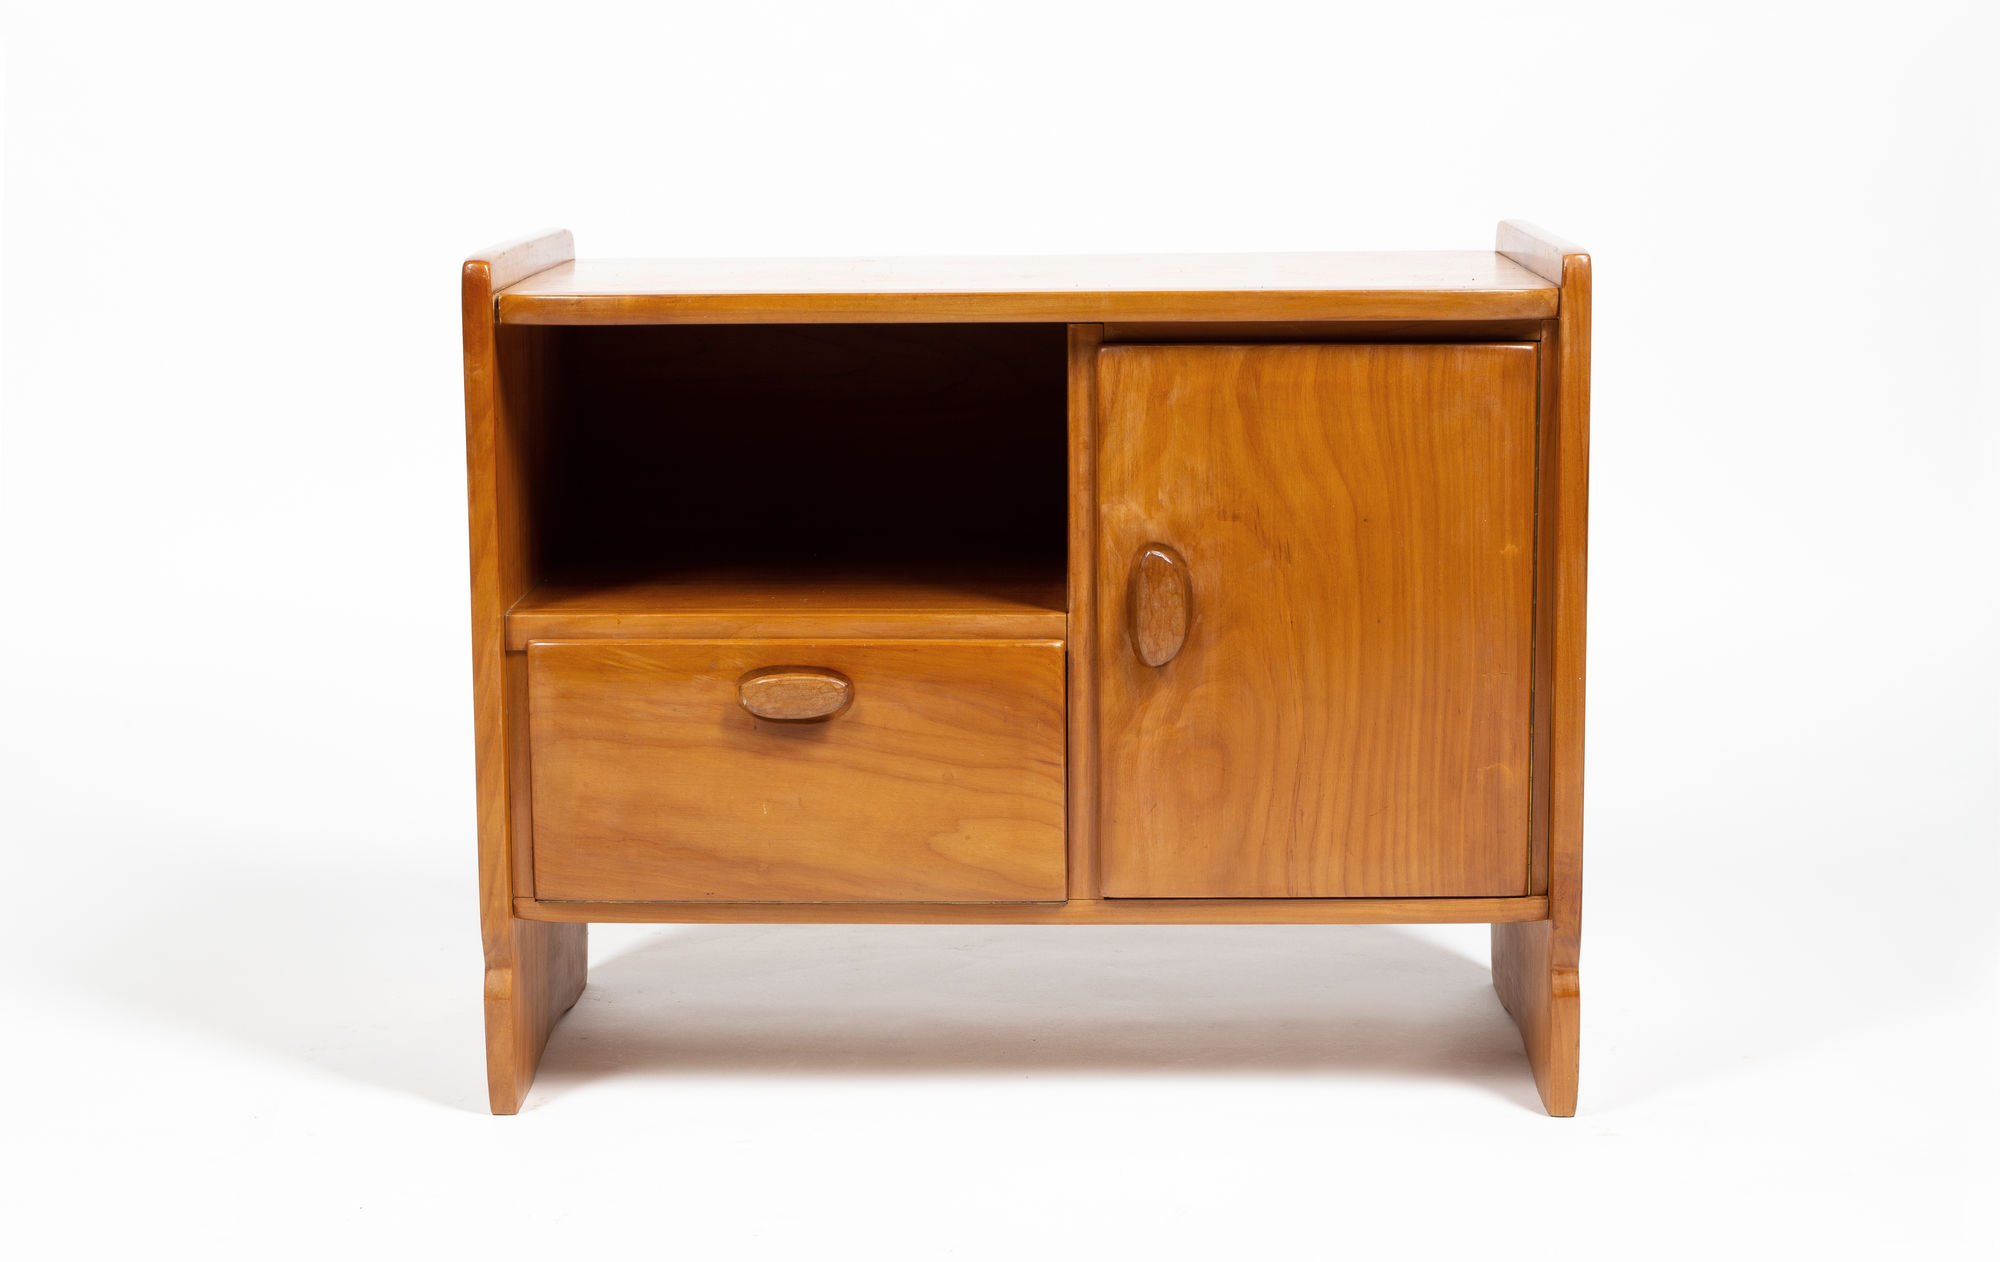 Jacob Müller Small sideboard